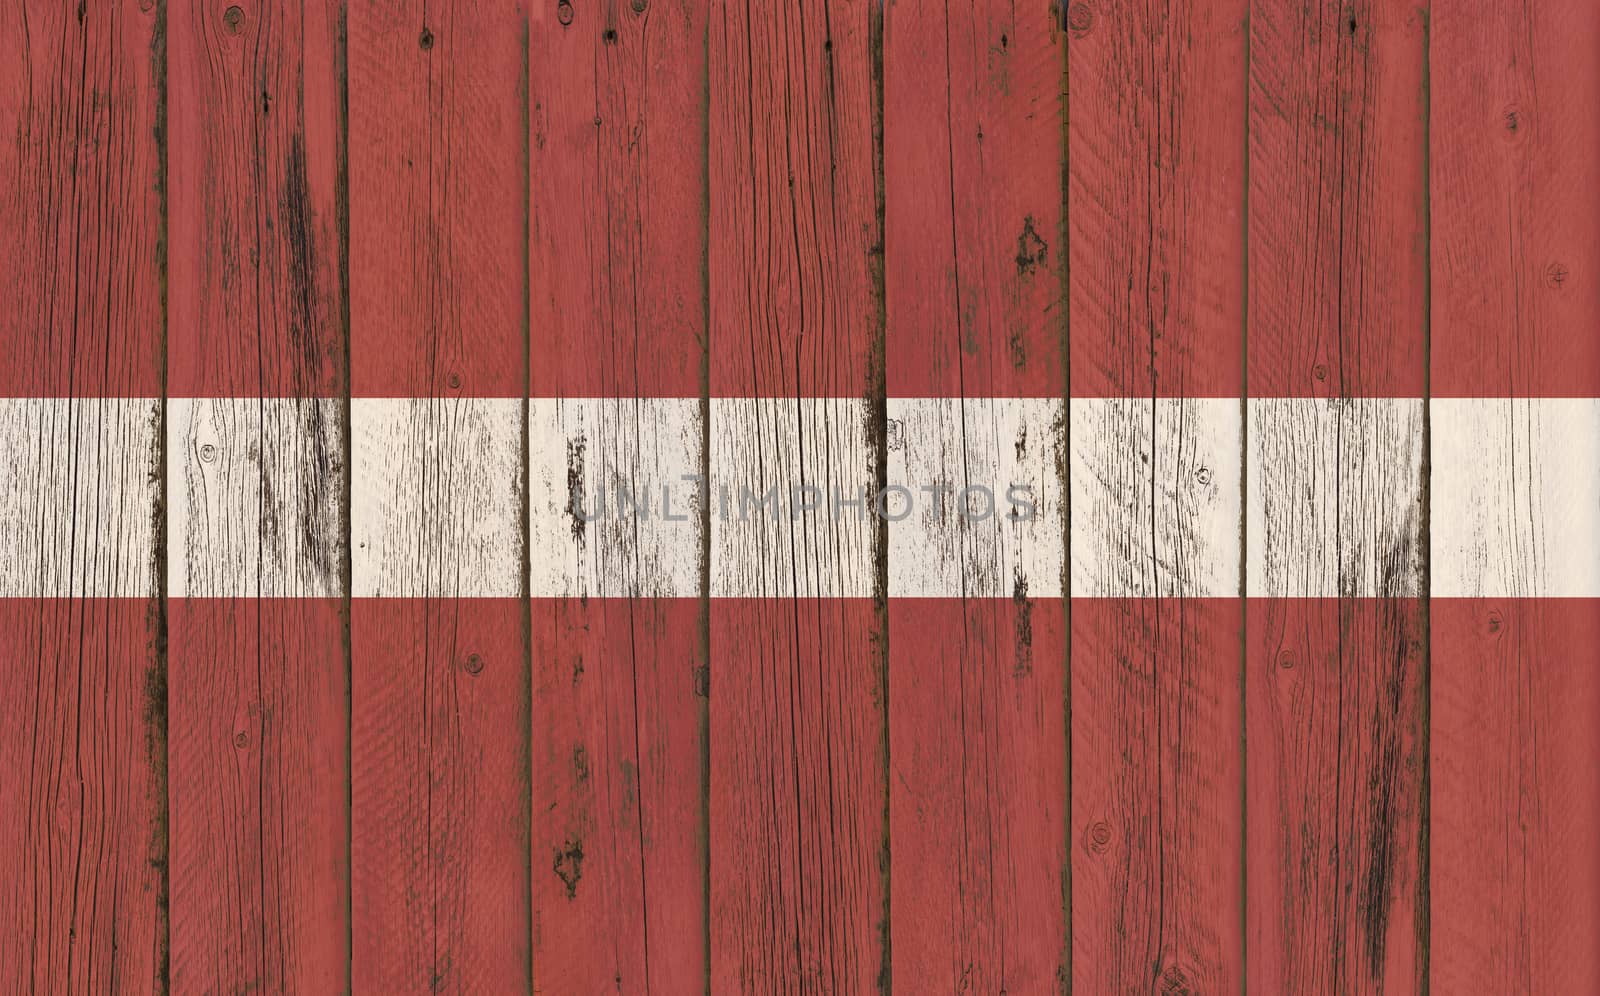 Flag of Latvia painted on wooden frame by DGolbay